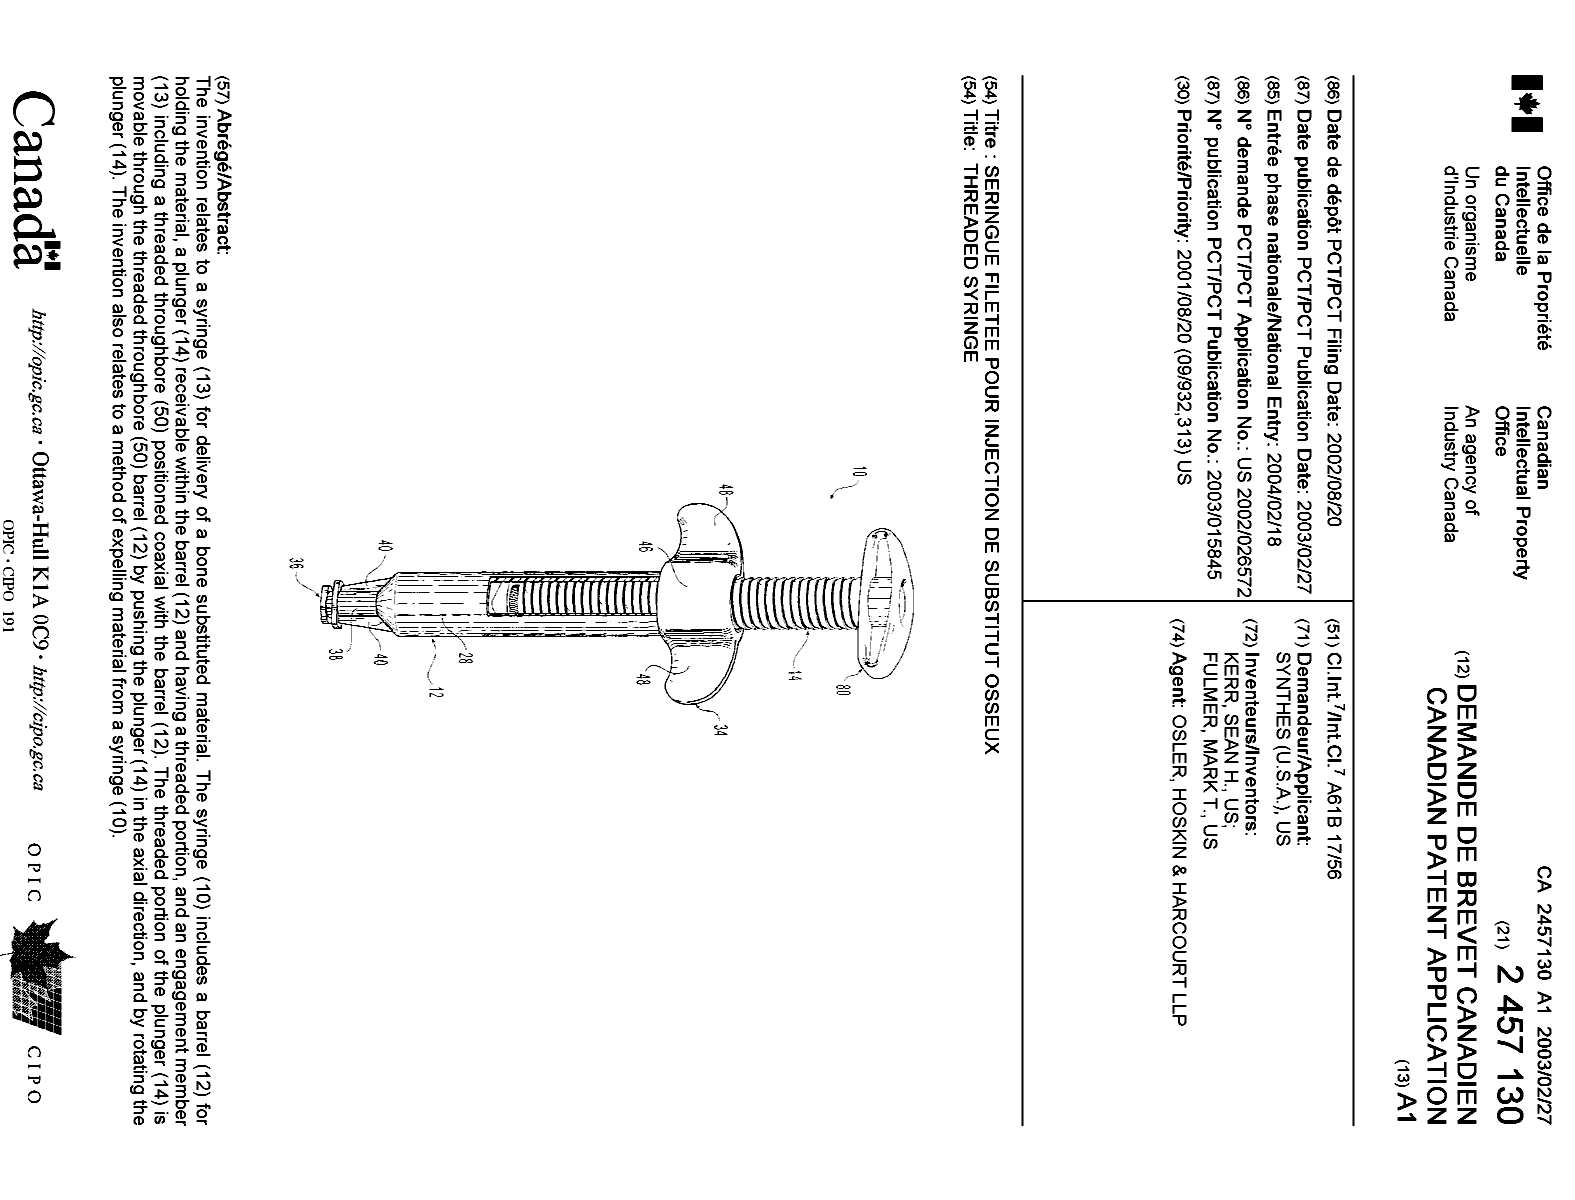 Canadian Patent Document 2457130. Cover Page 20040419. Image 1 of 1